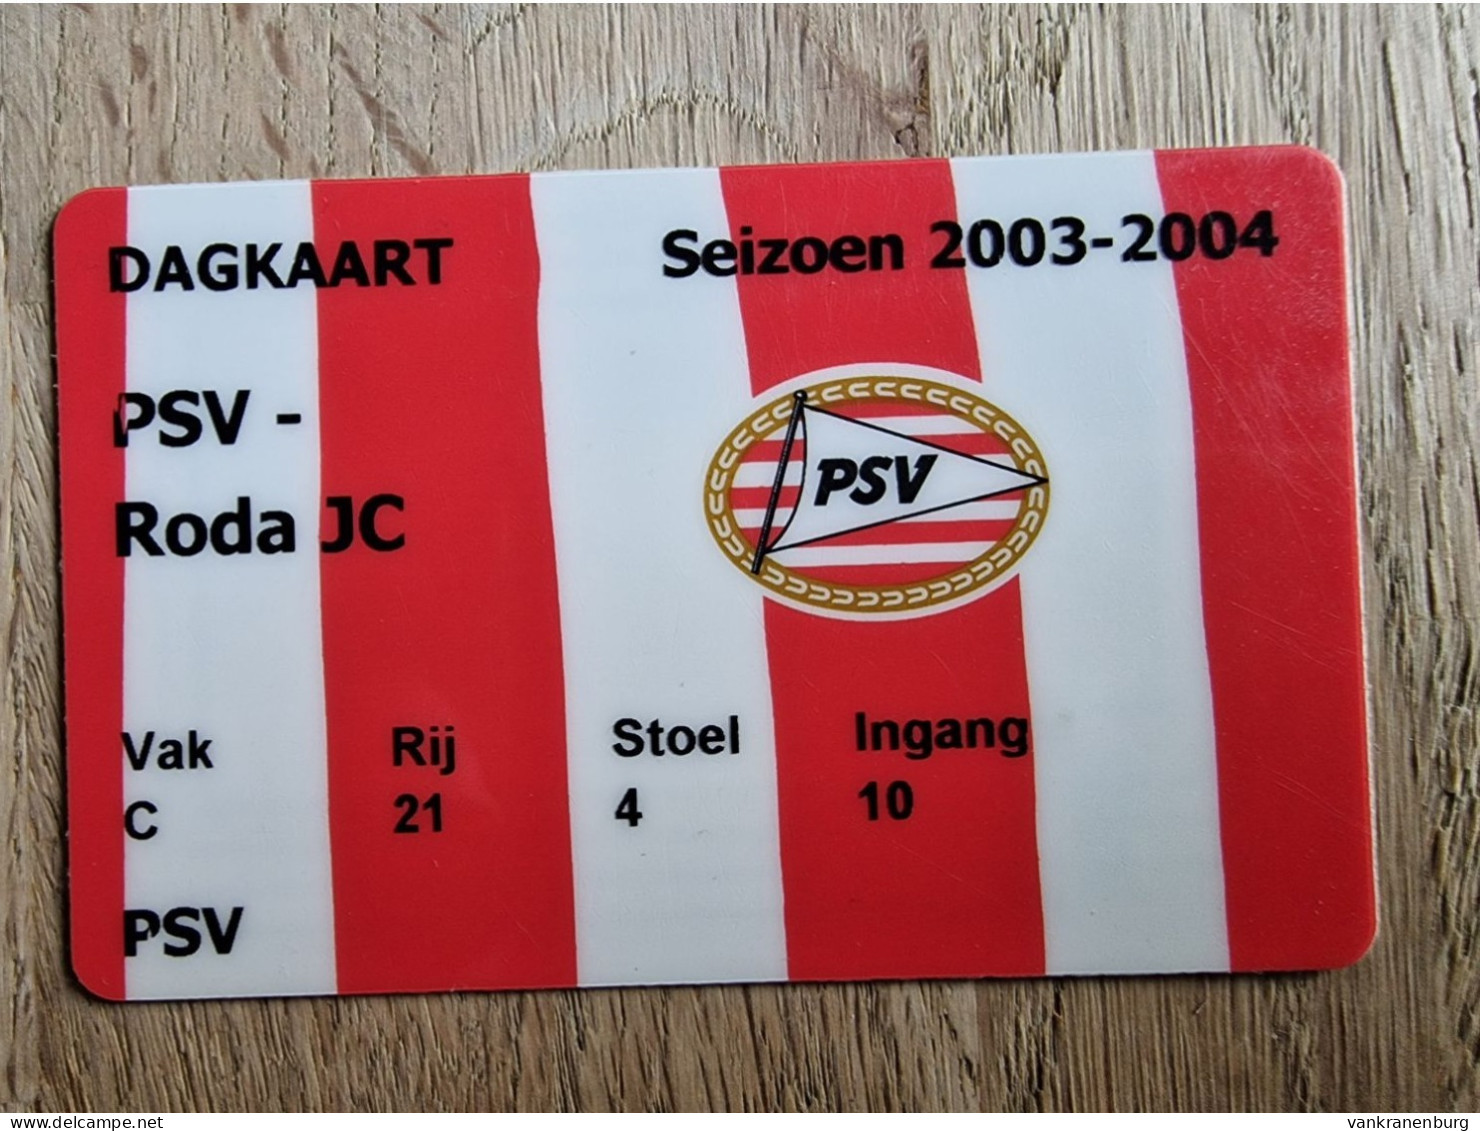 Day Club Card - PSV Eindhoven - Roda JC - 1-2 - 29.2.2004 - 2003-2004 - Football Soccer Fussball Voetbal Foot - Habillement, Souvenirs & Autres